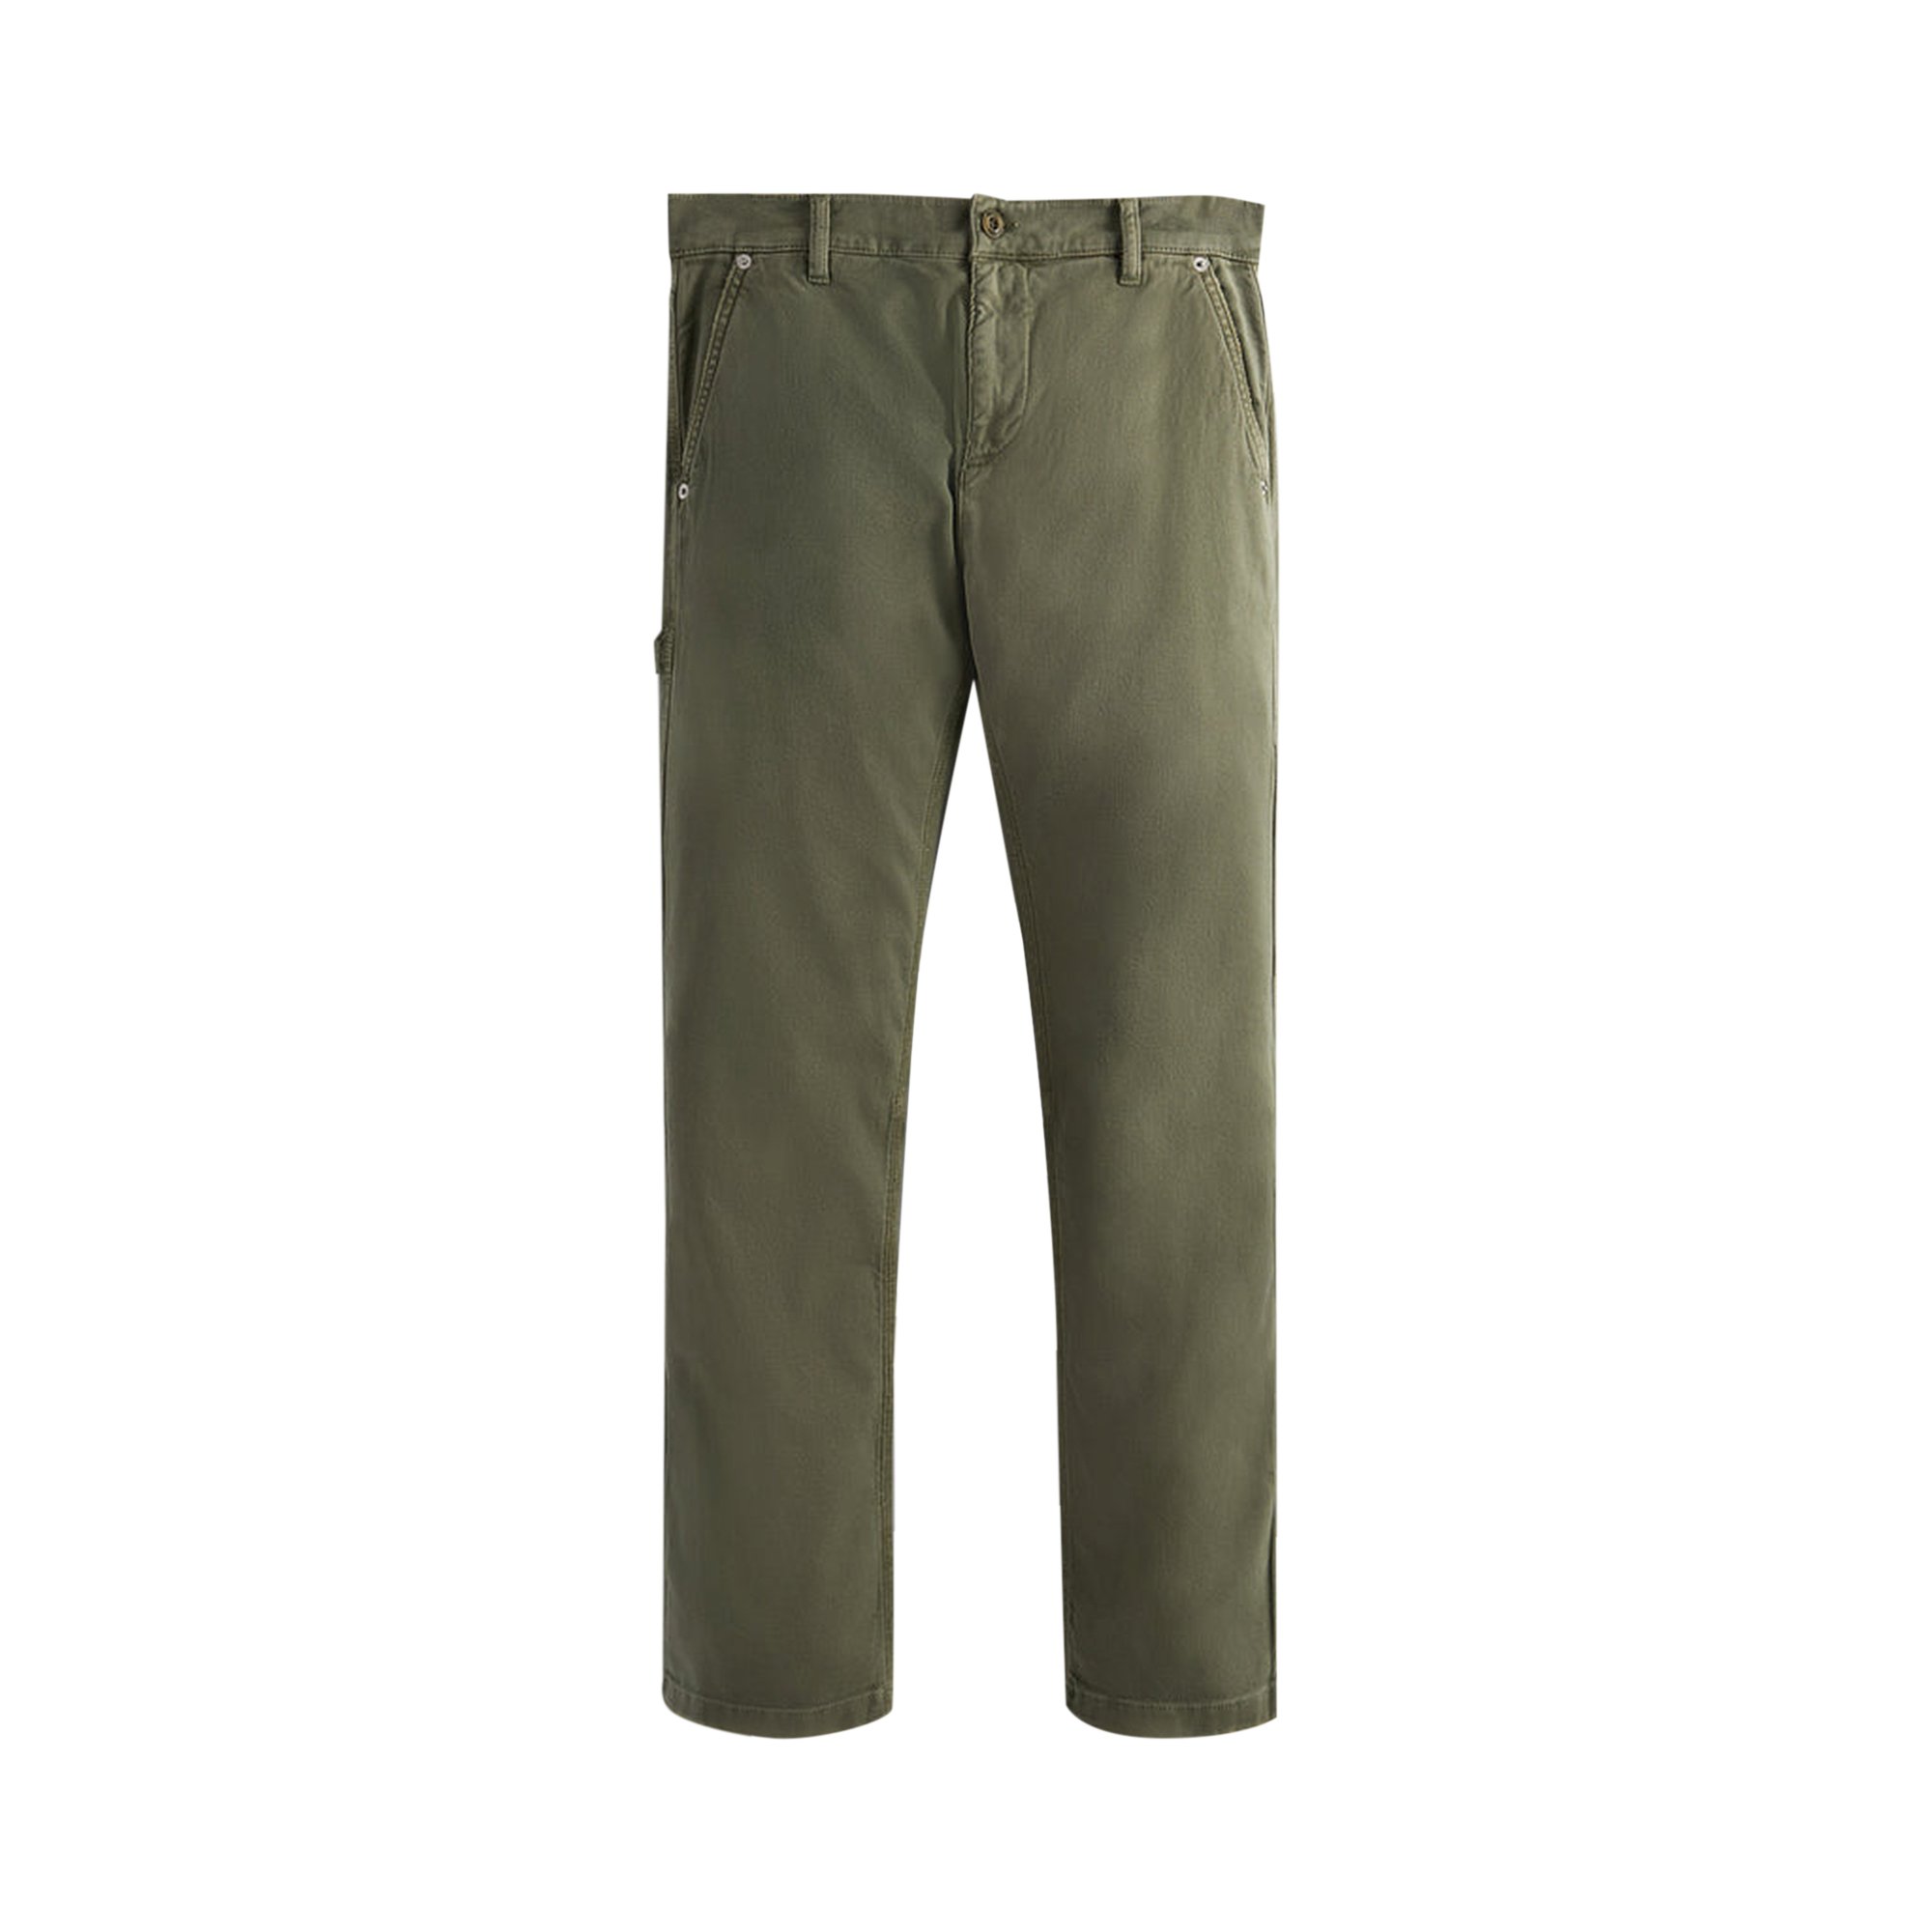 Buy Kith Overdyed Canvas Colden Pant 'Flagstaff' - KHM060221 301